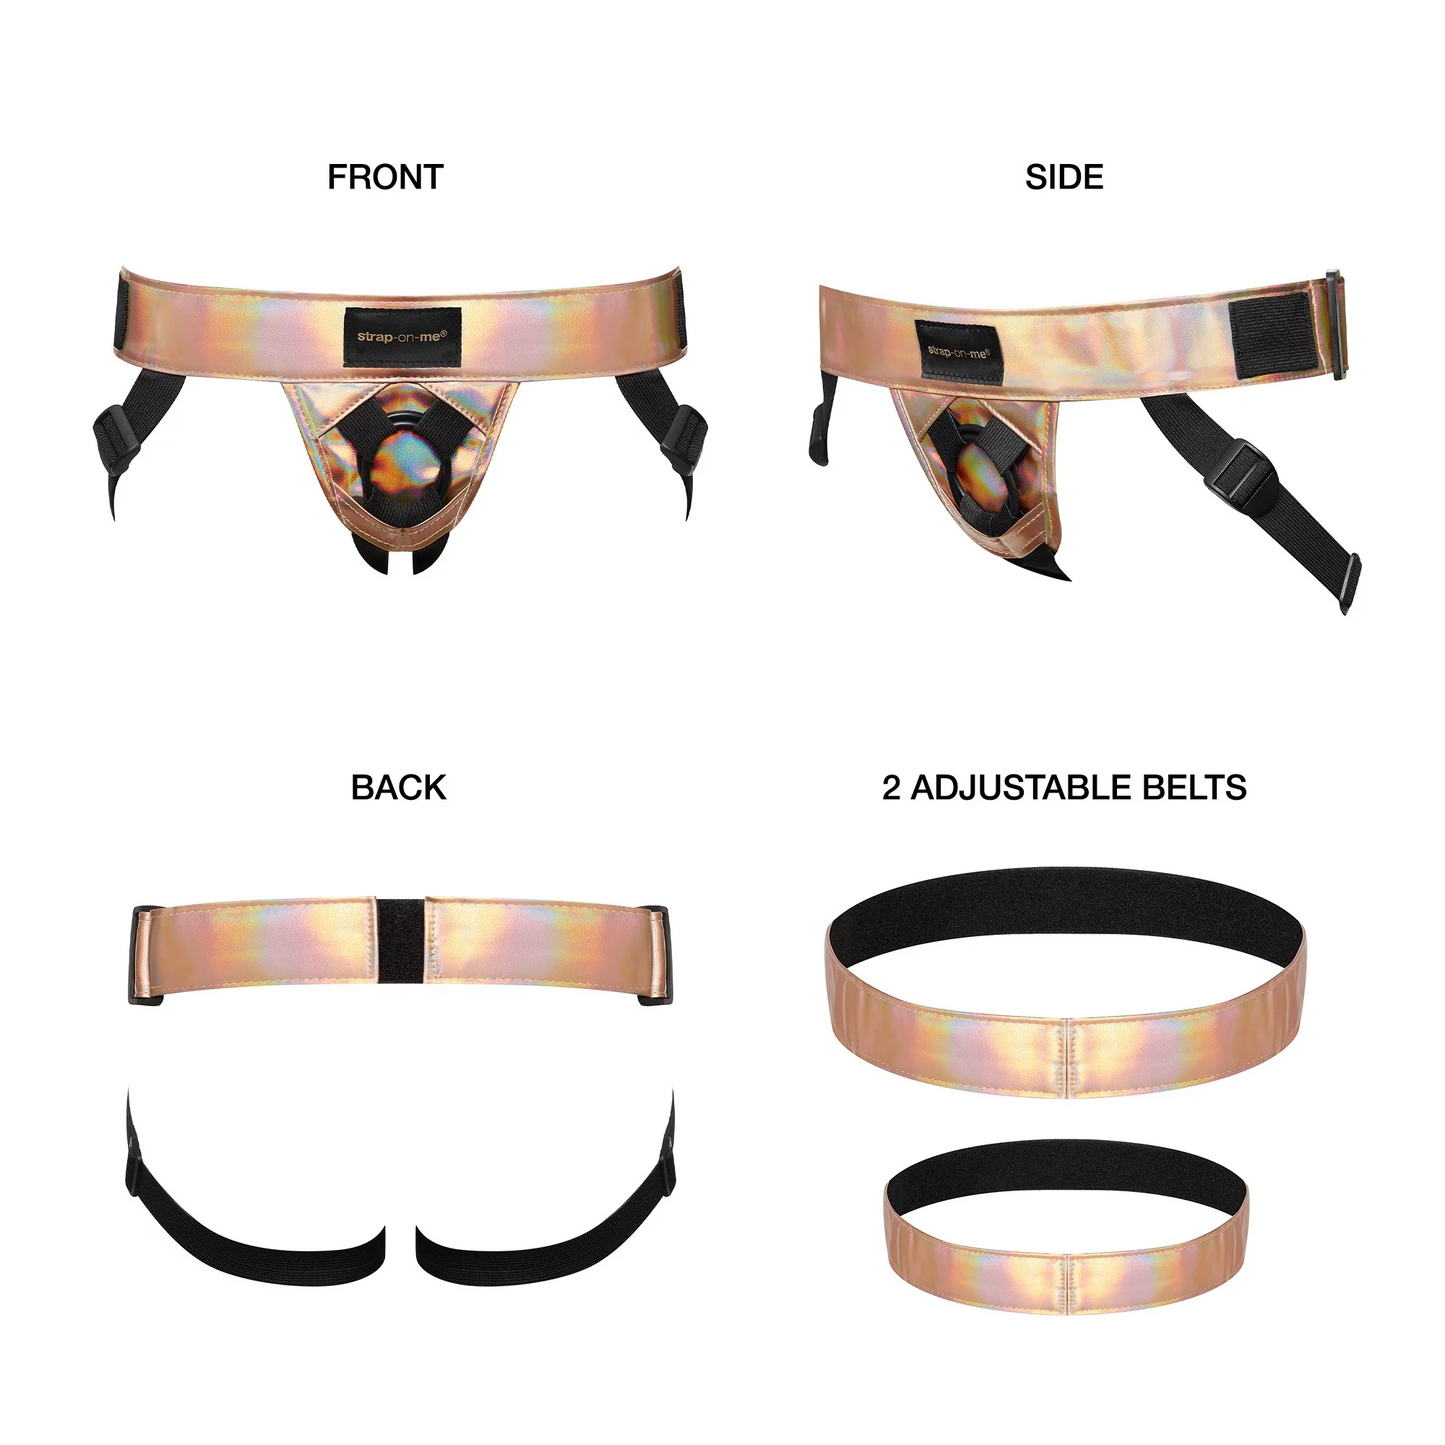 LEATHERETTE CURIOUS HARNESS by Strap-on-Me in Rose Gold Holographic